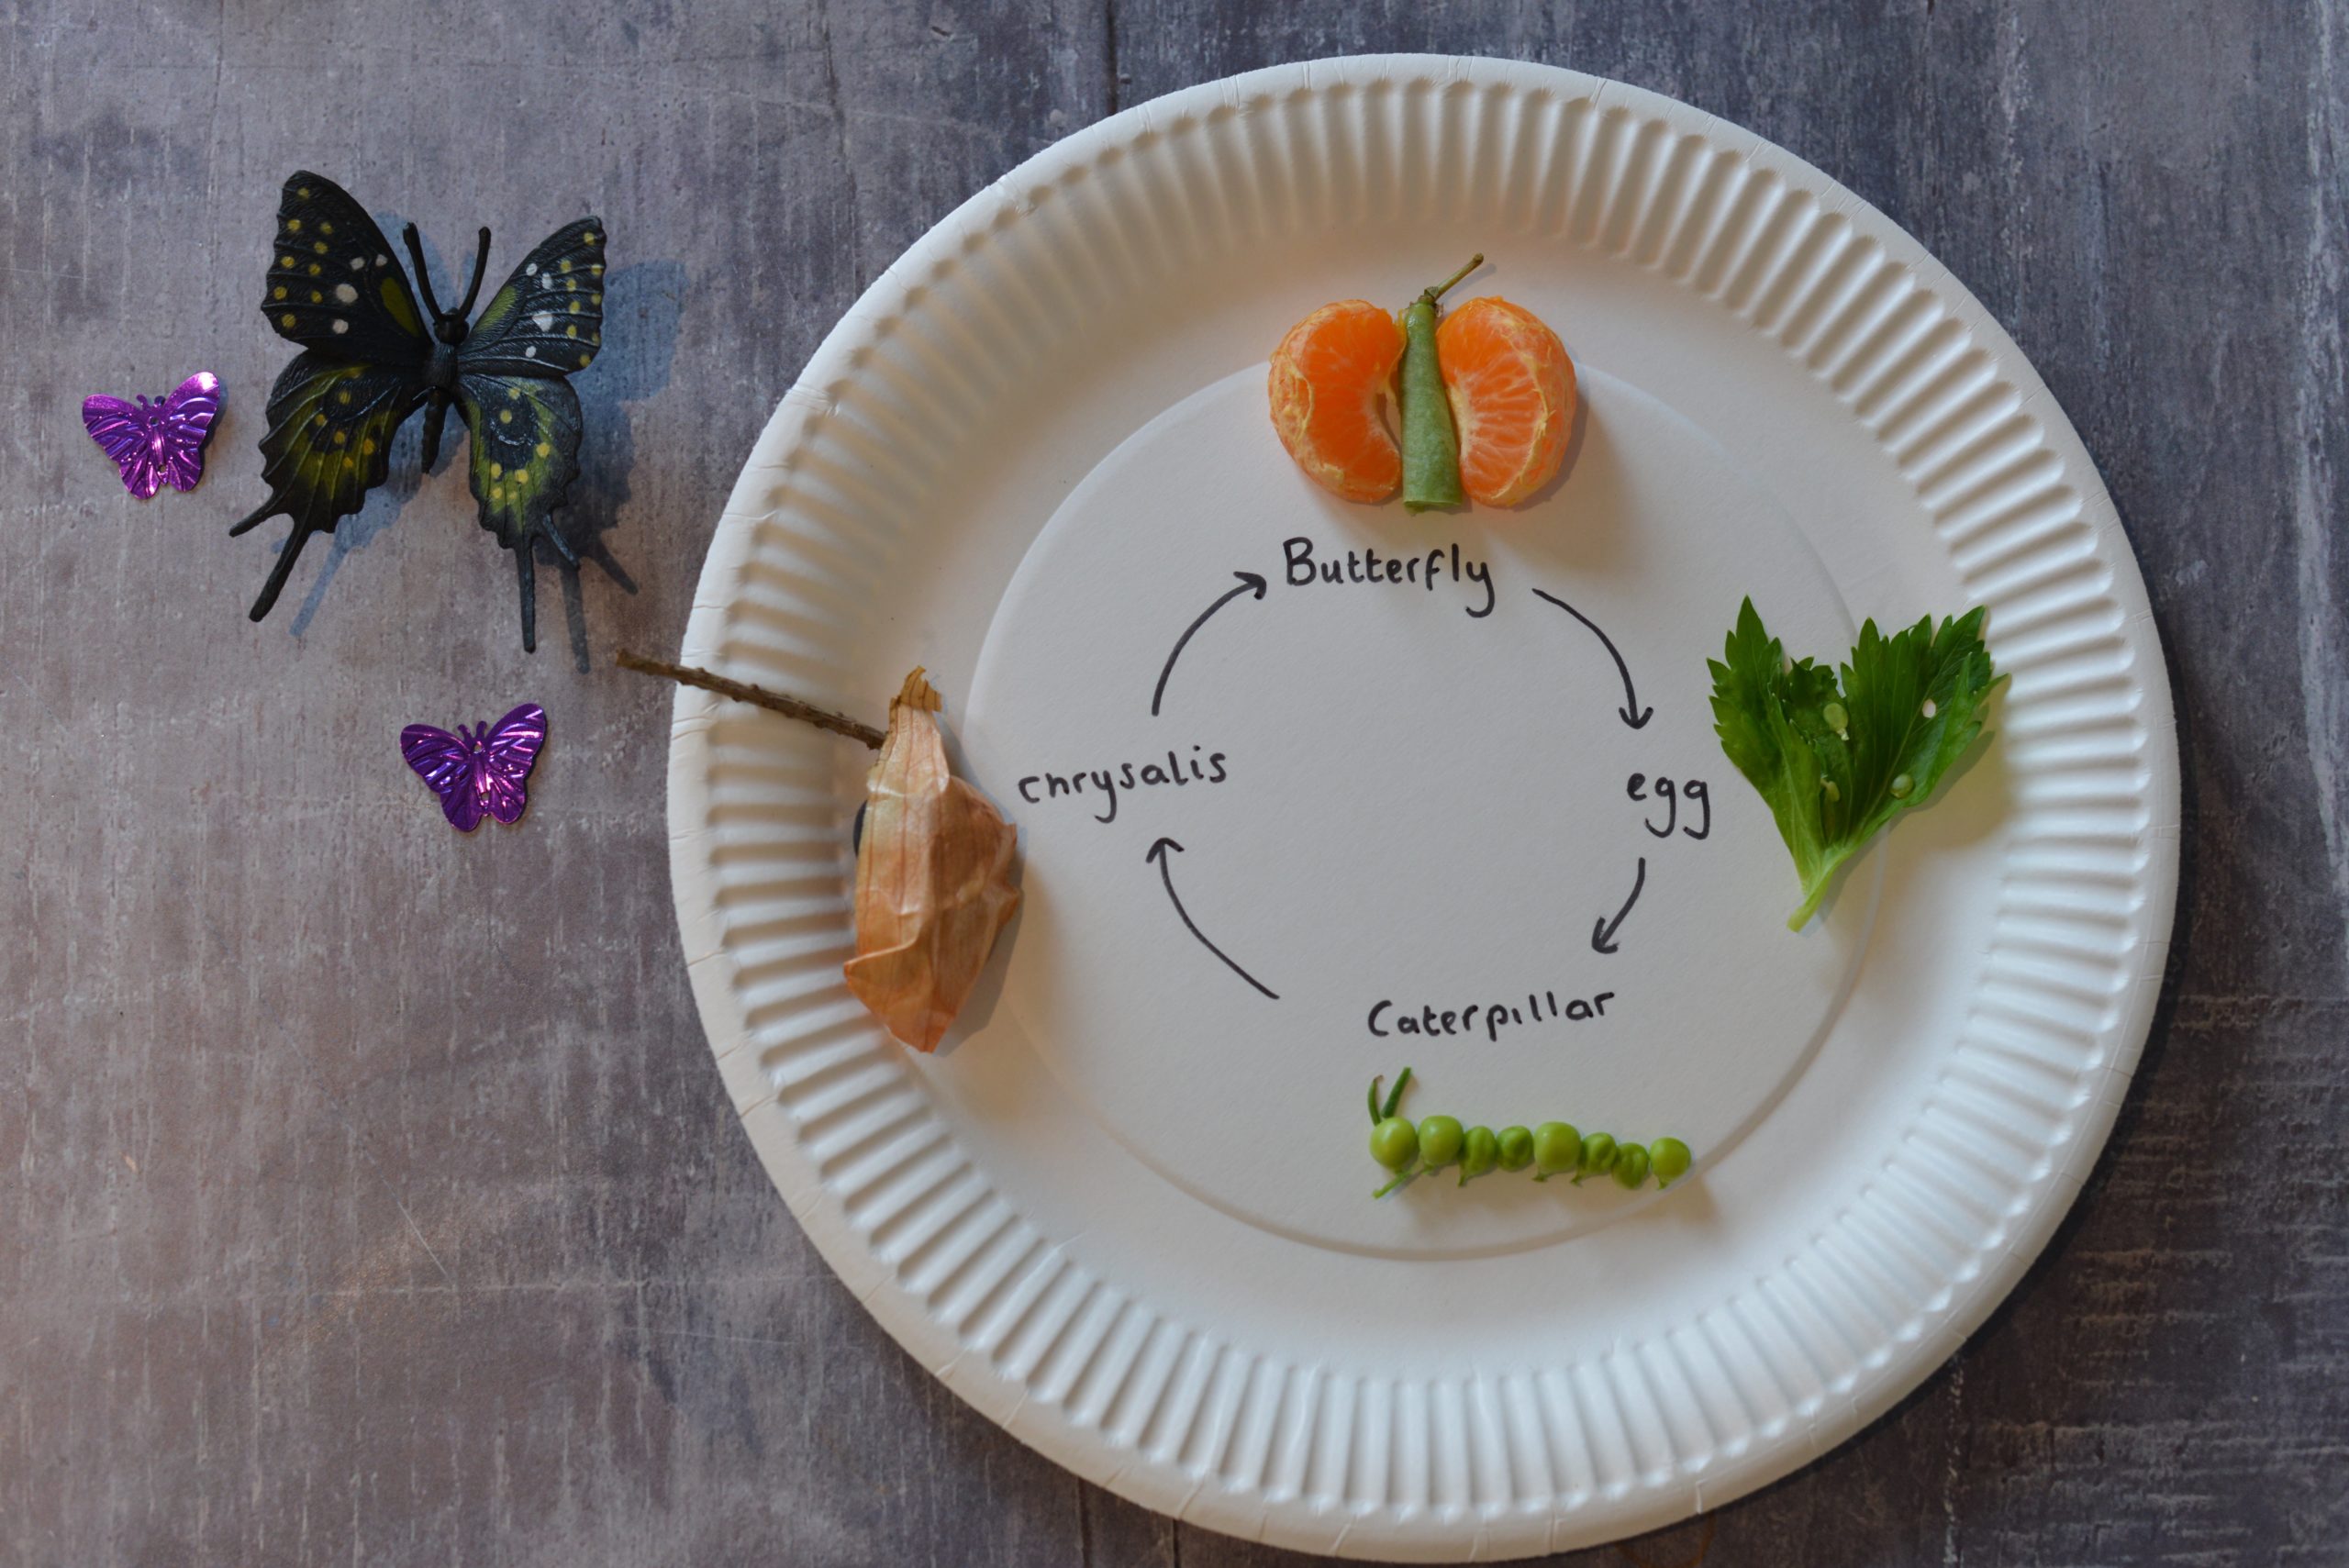 butterfly life cycle pasta craft